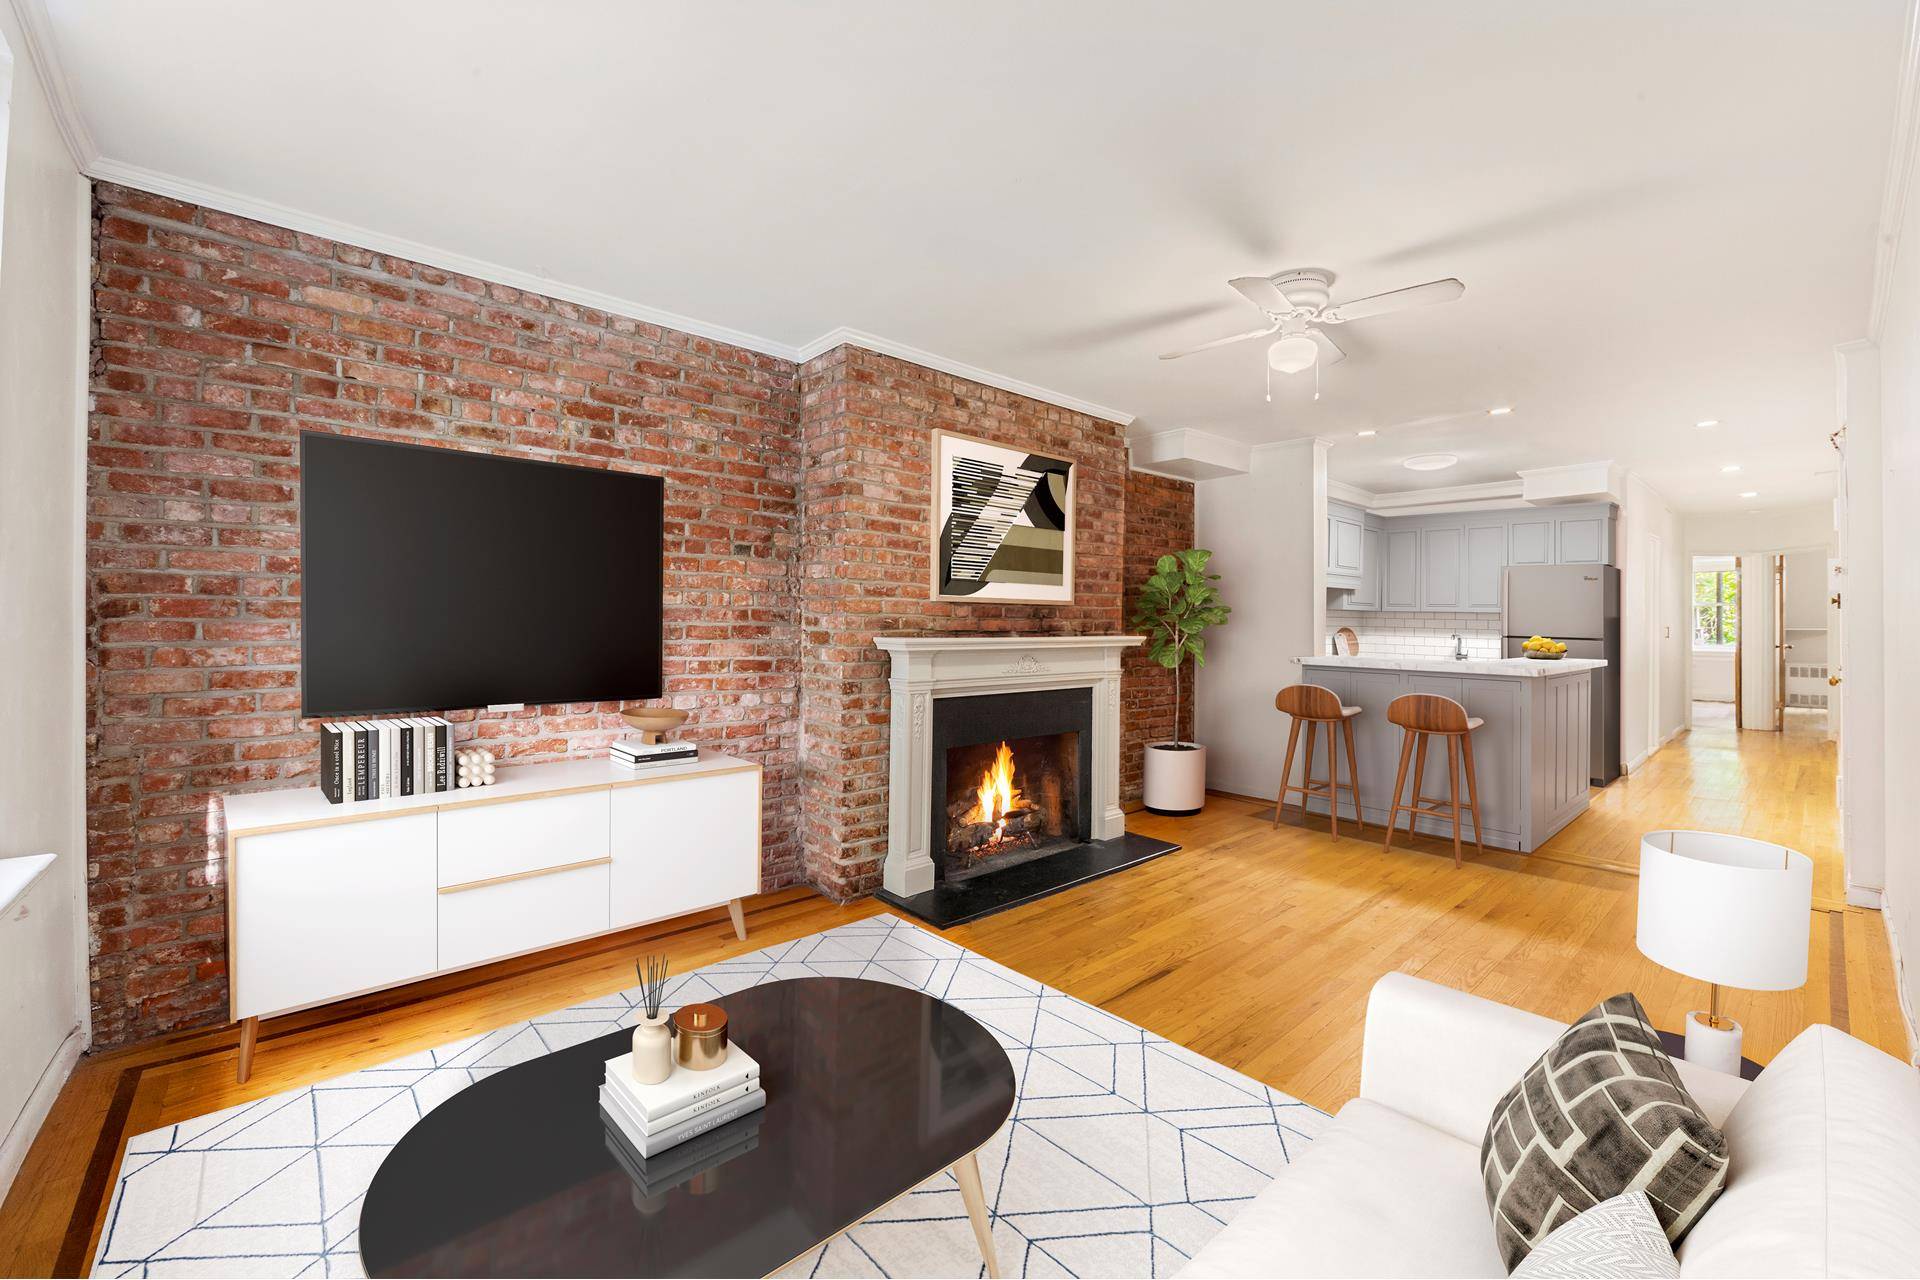 Introducing 1B at 333 W 22nd Street an absolutely charming, 2 bedroom pre war residence on one of the prettiest townhouse filled blocks in Chelsea.